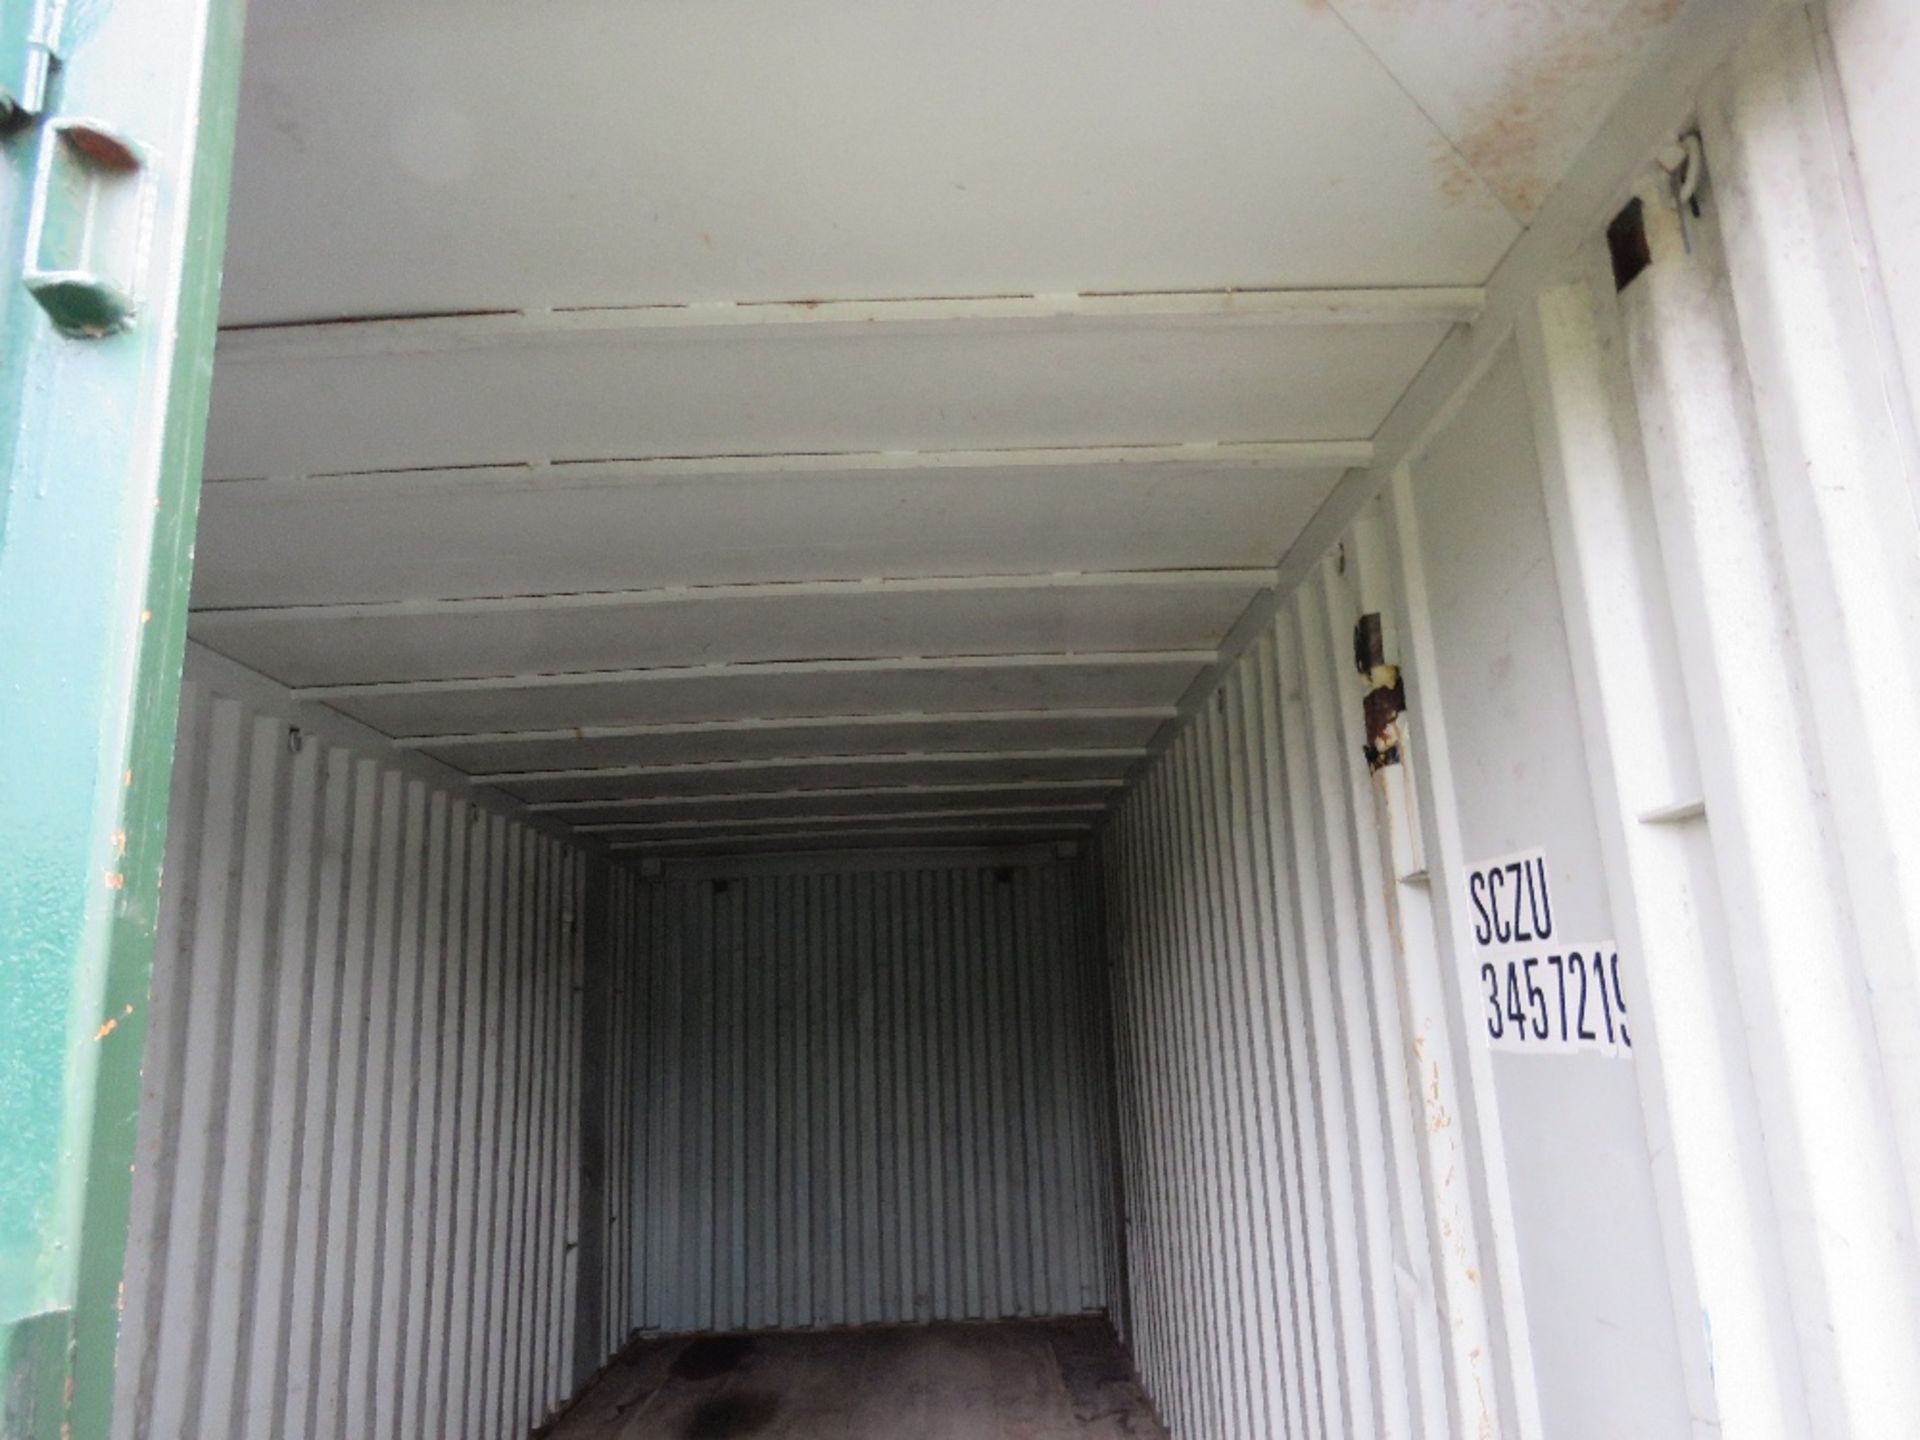 SECURE SHIPPING CONTAINER TYPE SITE STORE, 20FT LENGTH. FROM VISUAL INSPECTION APPEARED DRY INSIDE. - Image 3 of 5